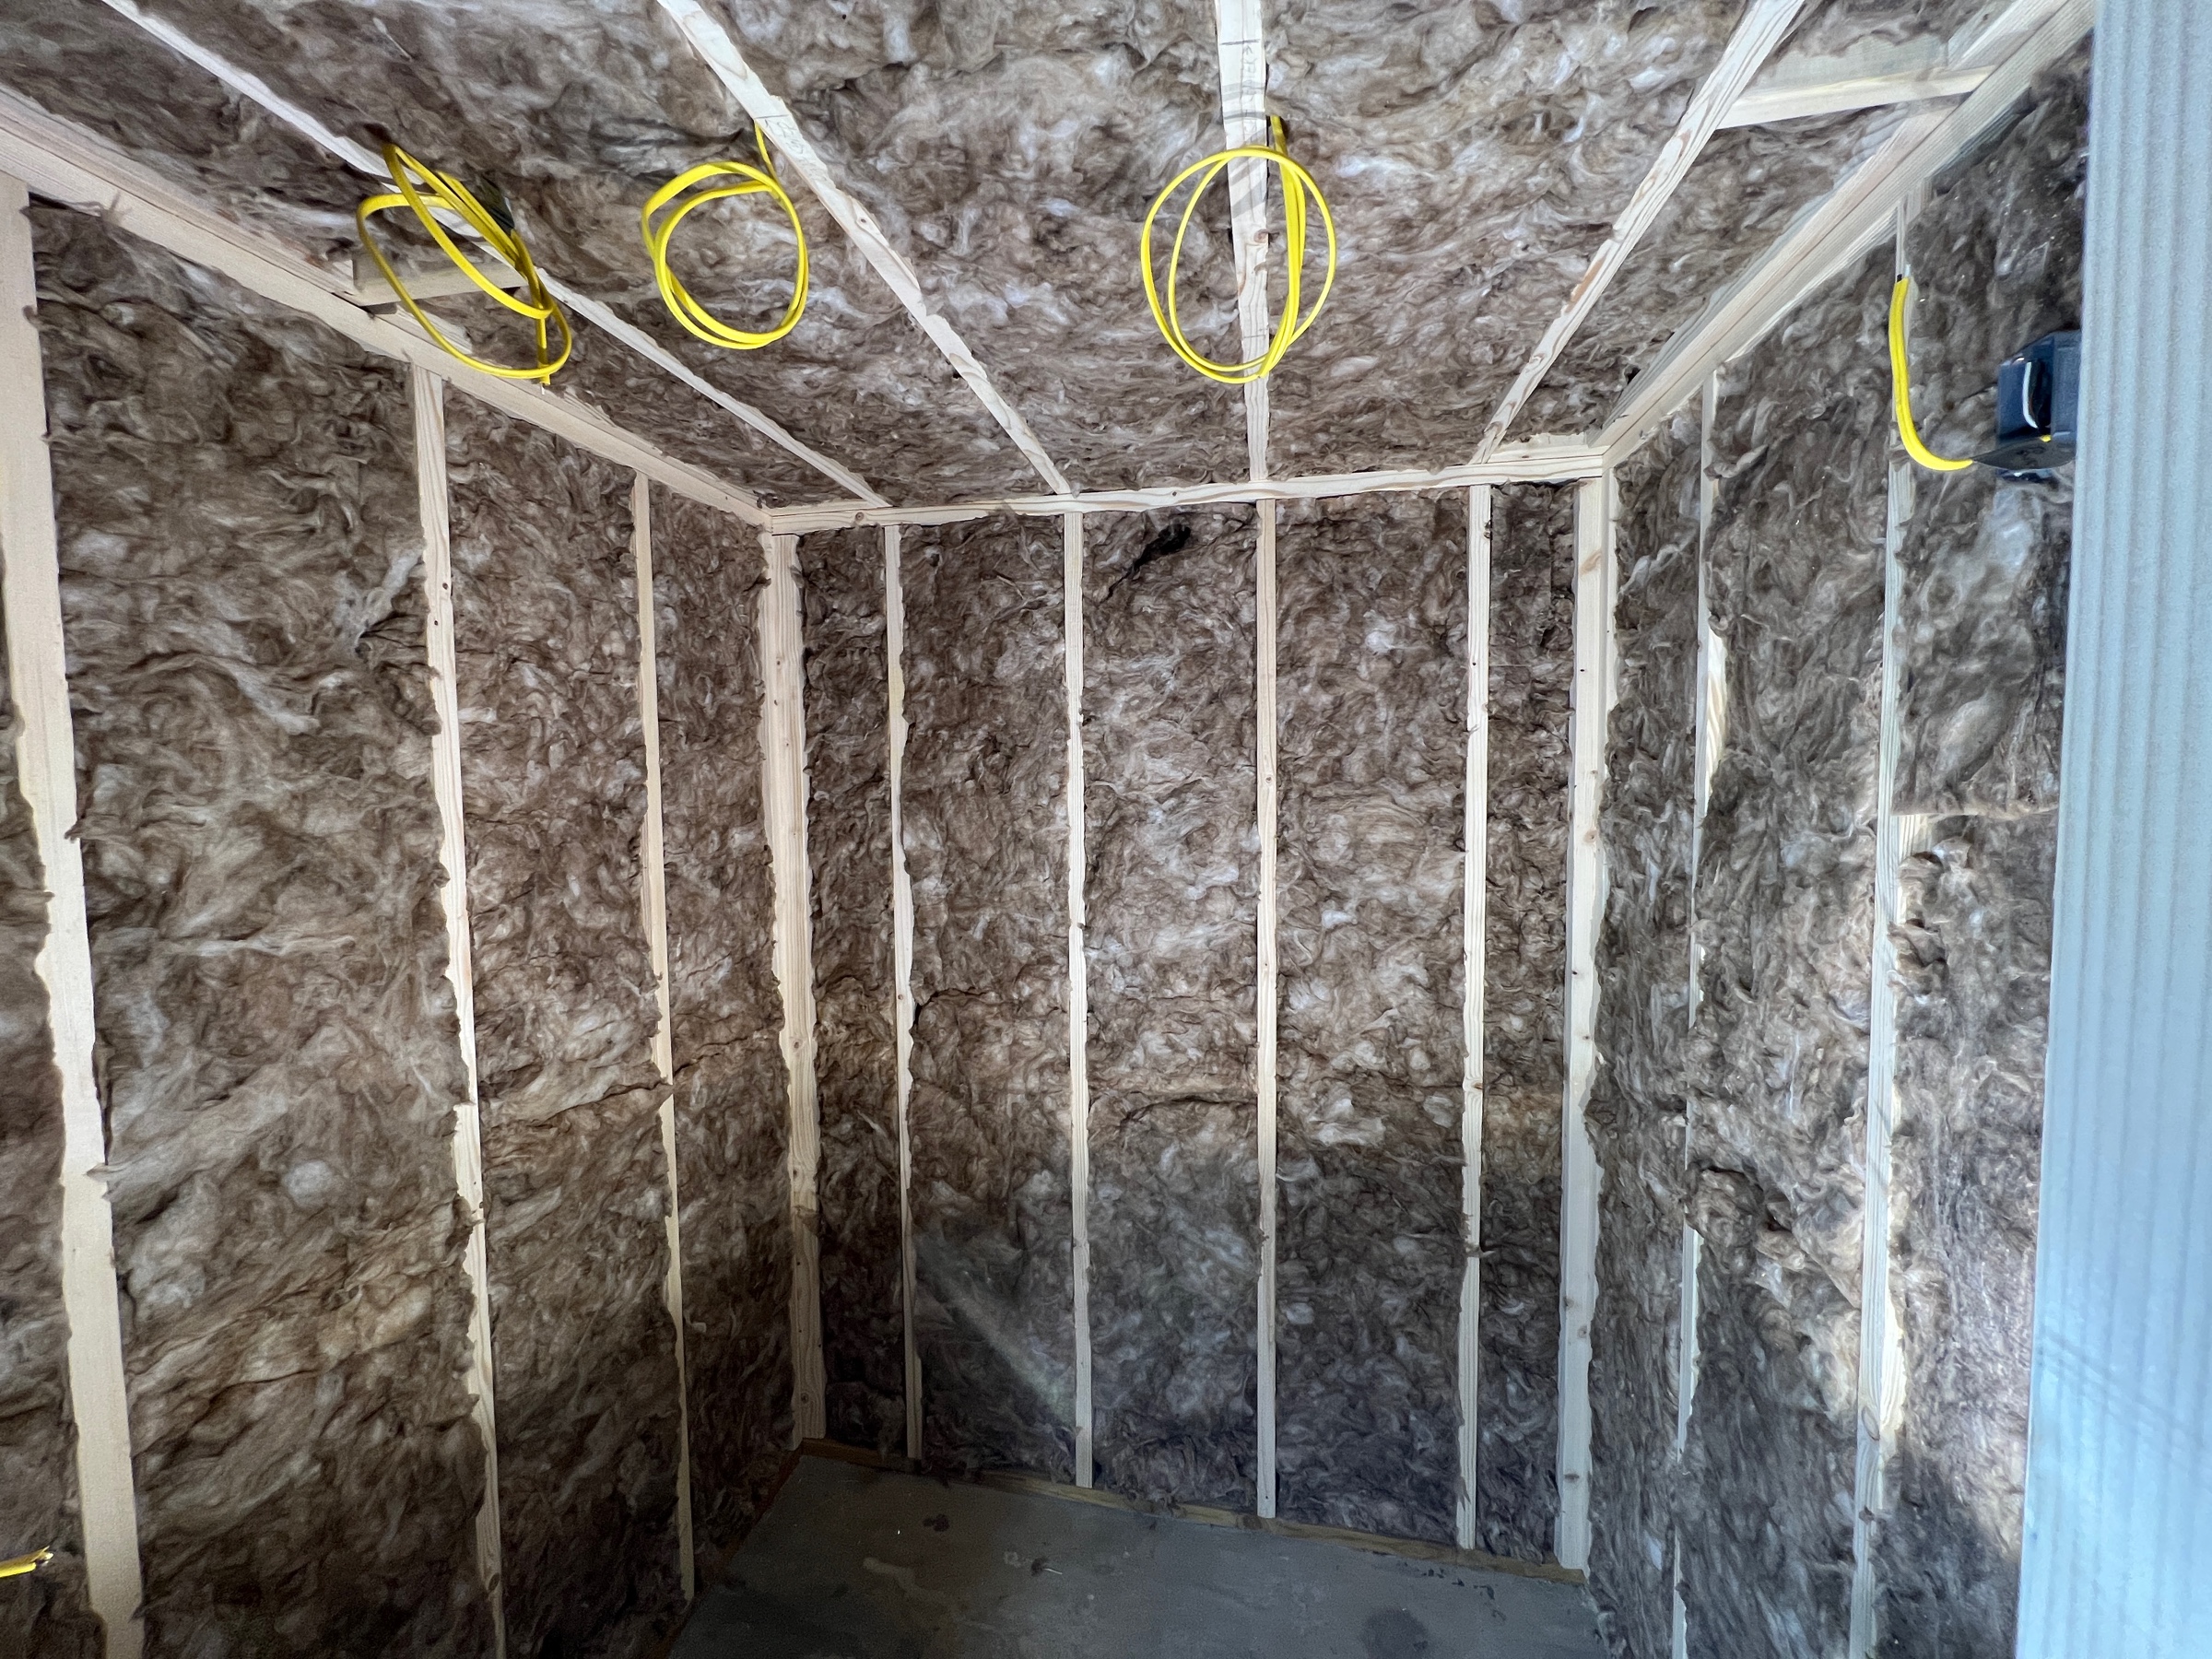 A small framed room with studs exposed and fiberglass insulation filling the voids between the studs